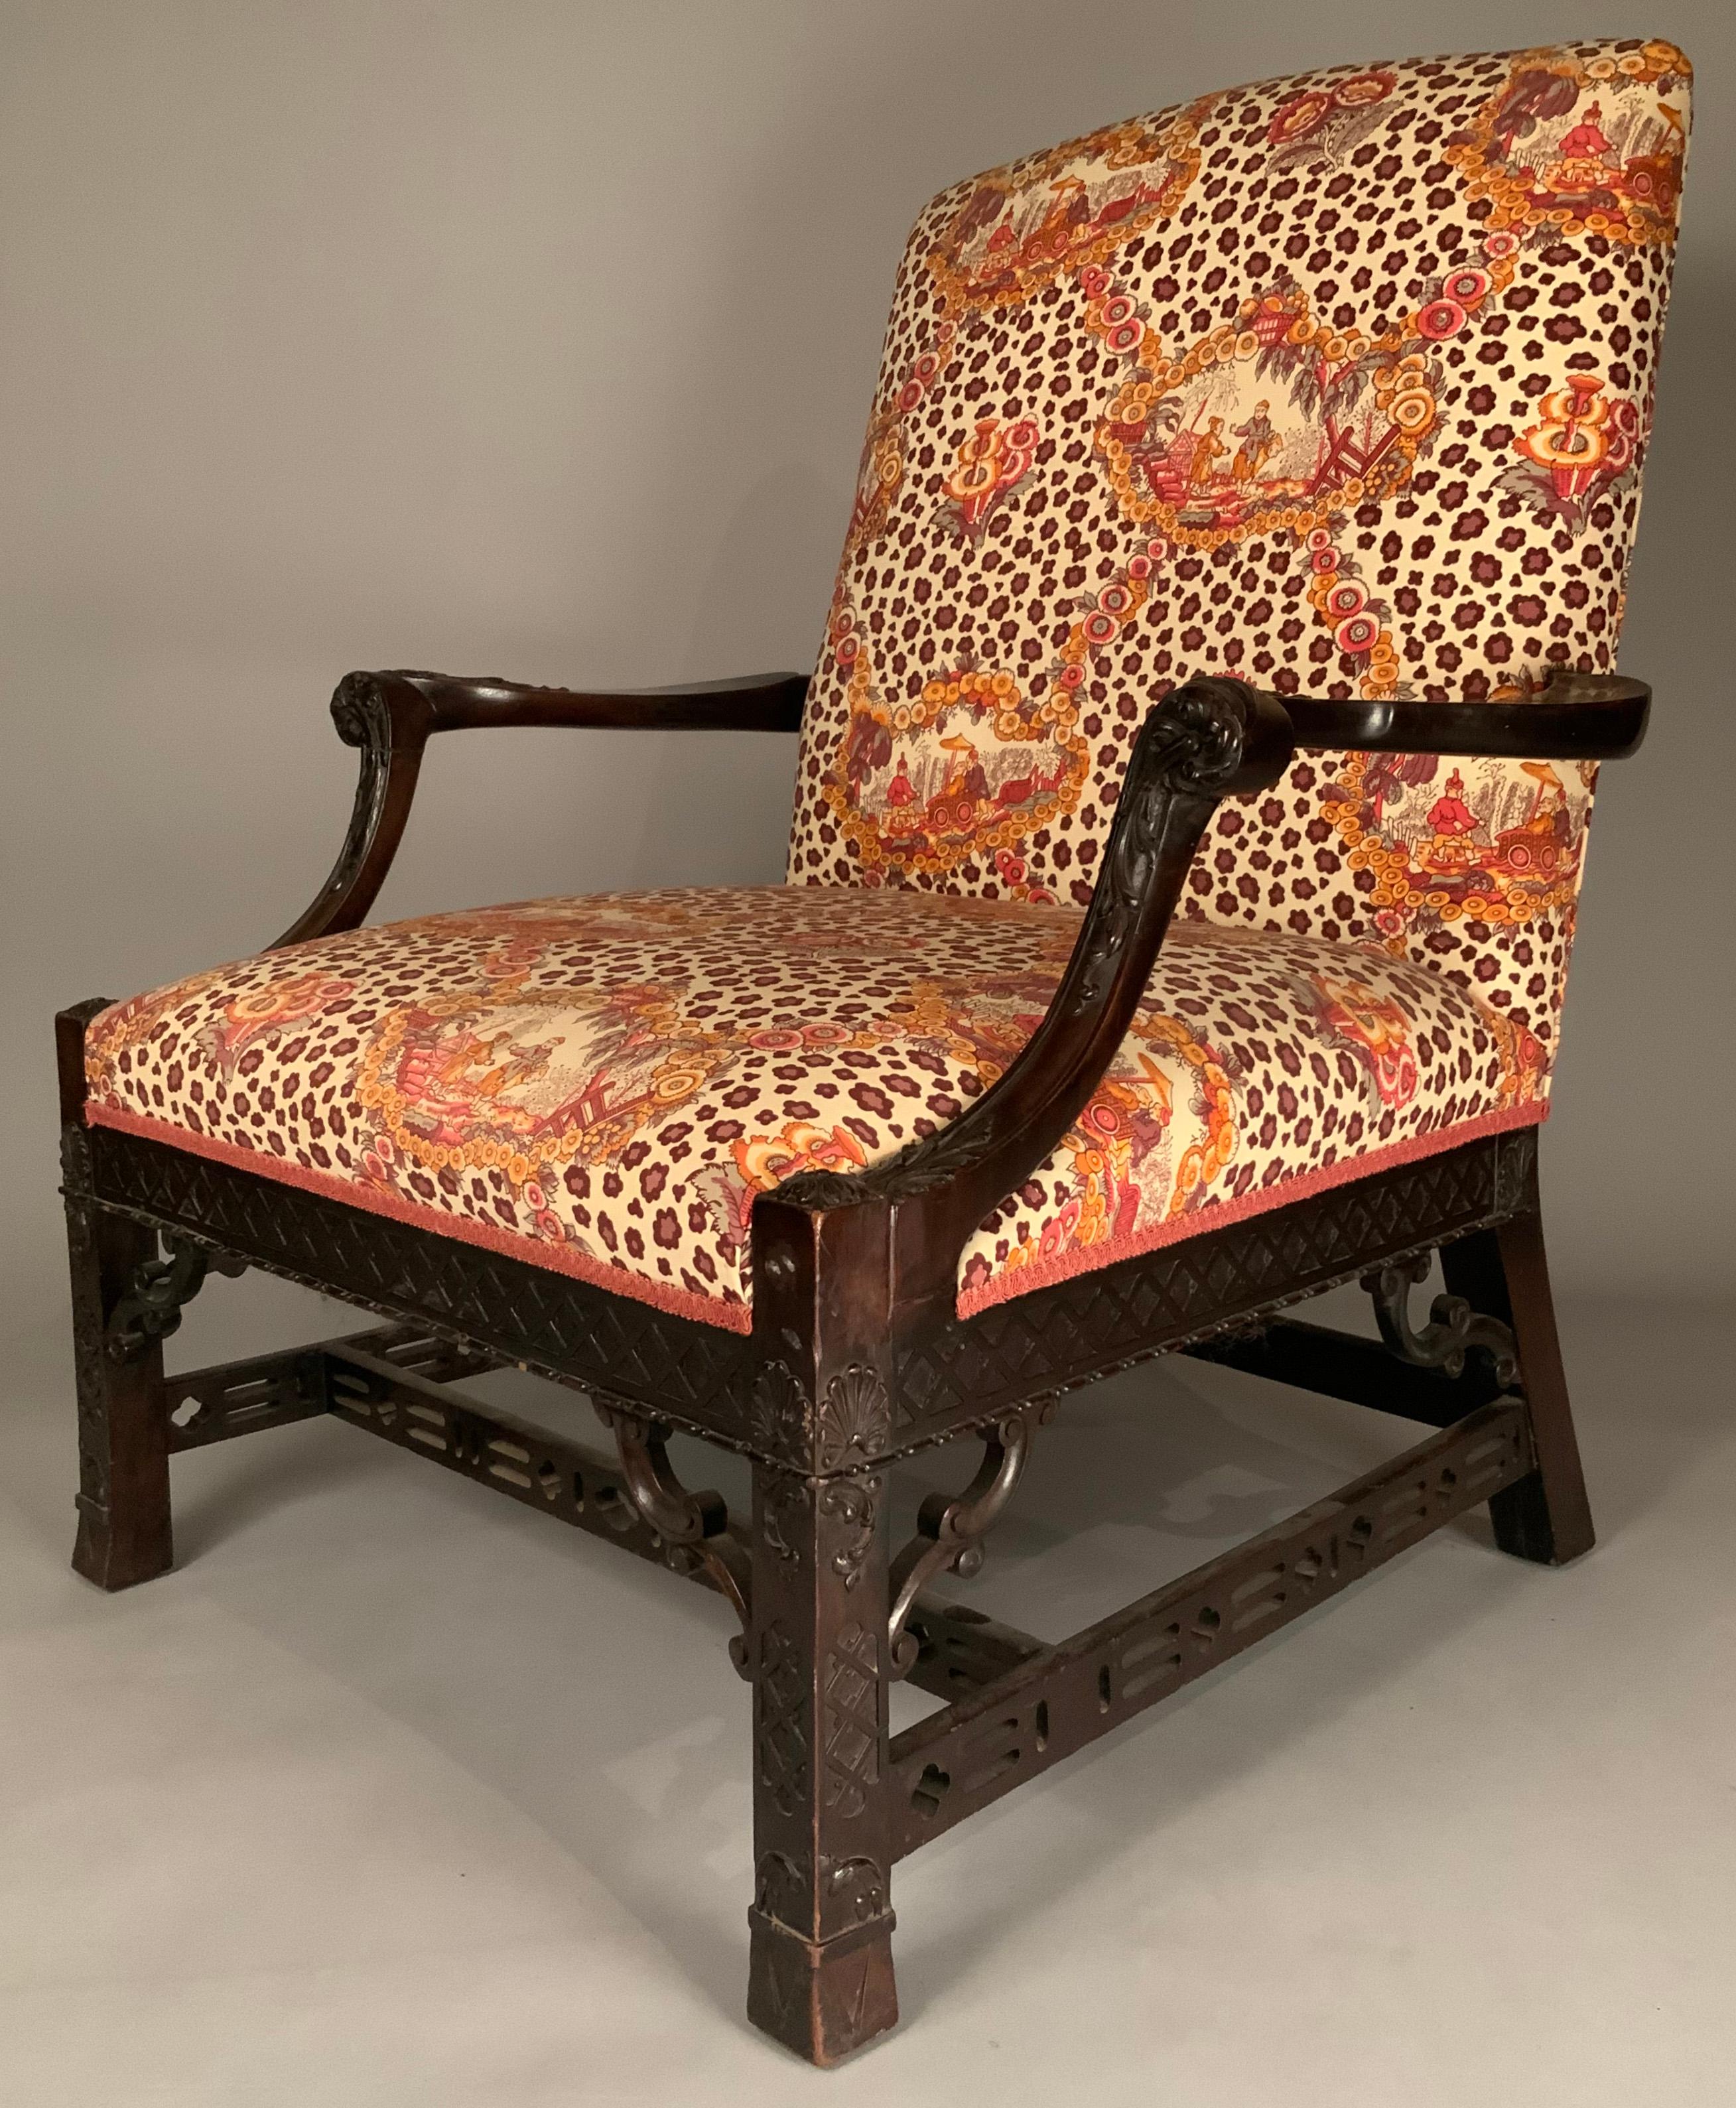 a beautiful and substantial large antique Chinese Chippendale Lounge Chair, c. 1940. Wonderful carved frame with fretwork panels around the base, and wonderful details all around. In its original pictorial upholstery fabric, which is in good